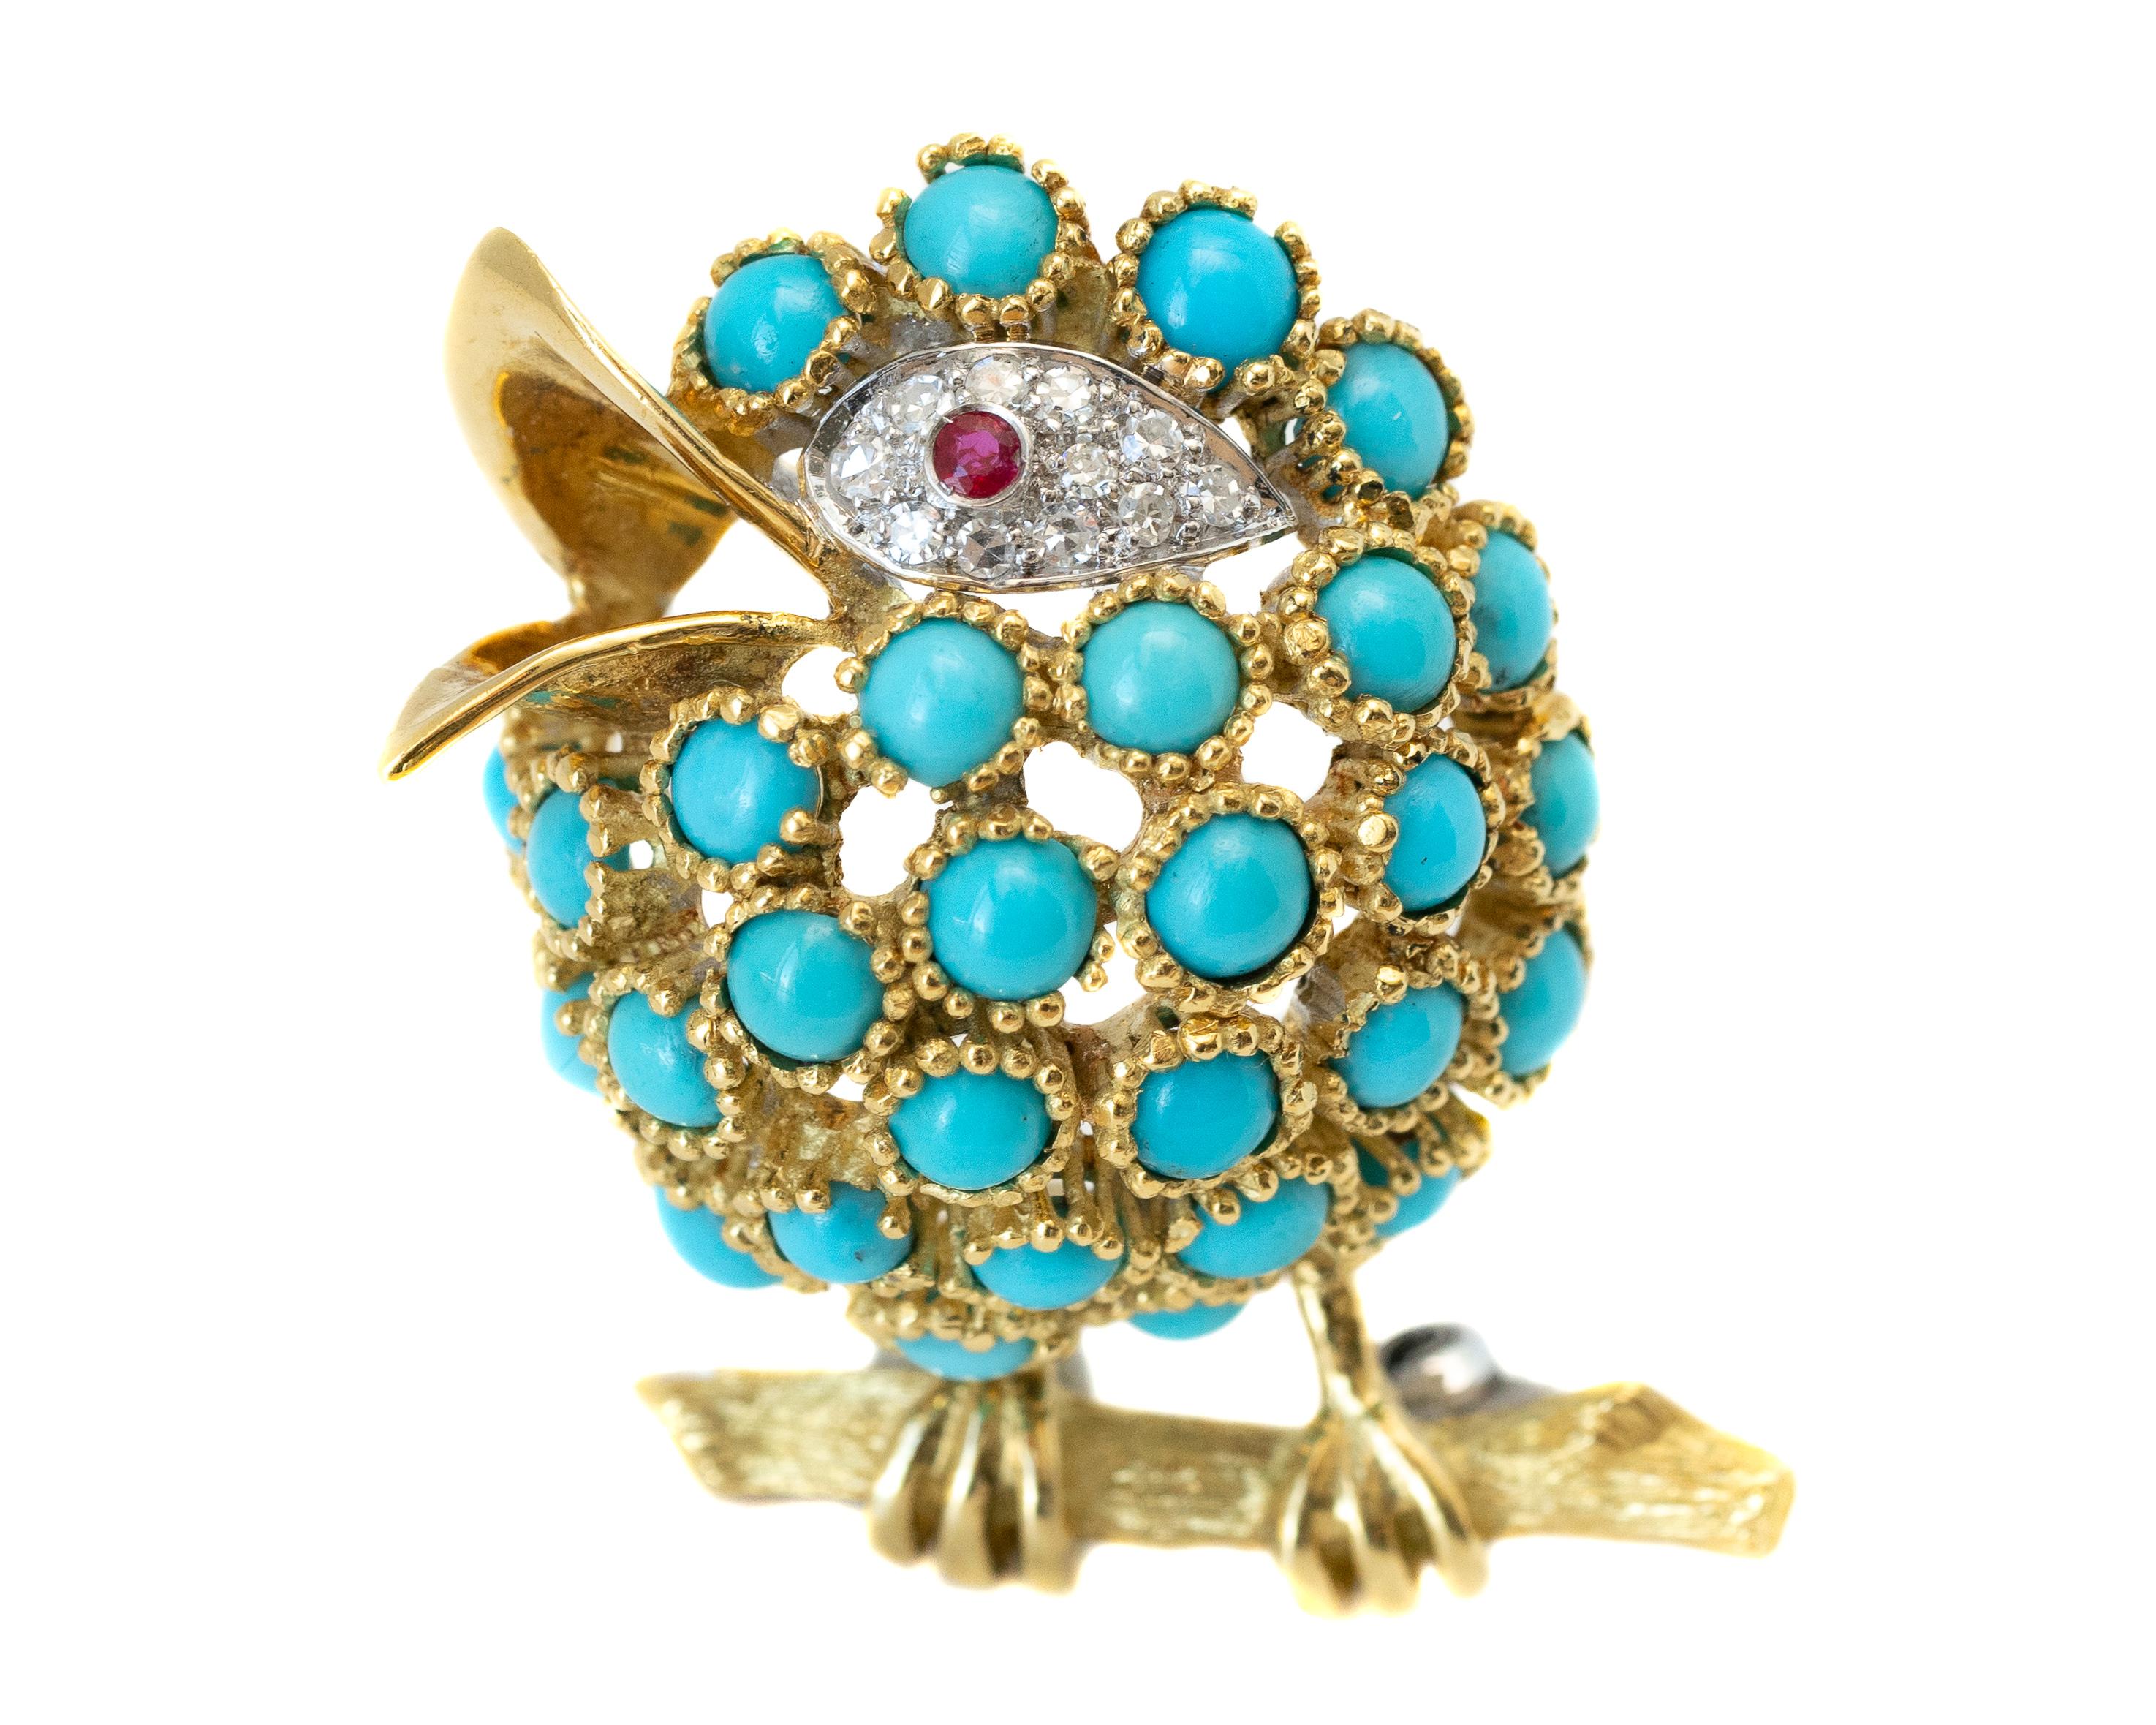 Here is a beautiful puffed Gold puffed bird brooch crafted in 18 Karat Yellow Gold, Turquoise, Diamonds, Ruby. The bird is perched on a branch.

Additional features:
- Turquoise cabochons
- Diamond Eye
- Ruby Pupil
- 29 Blue Turquoise Cabochons
- 11